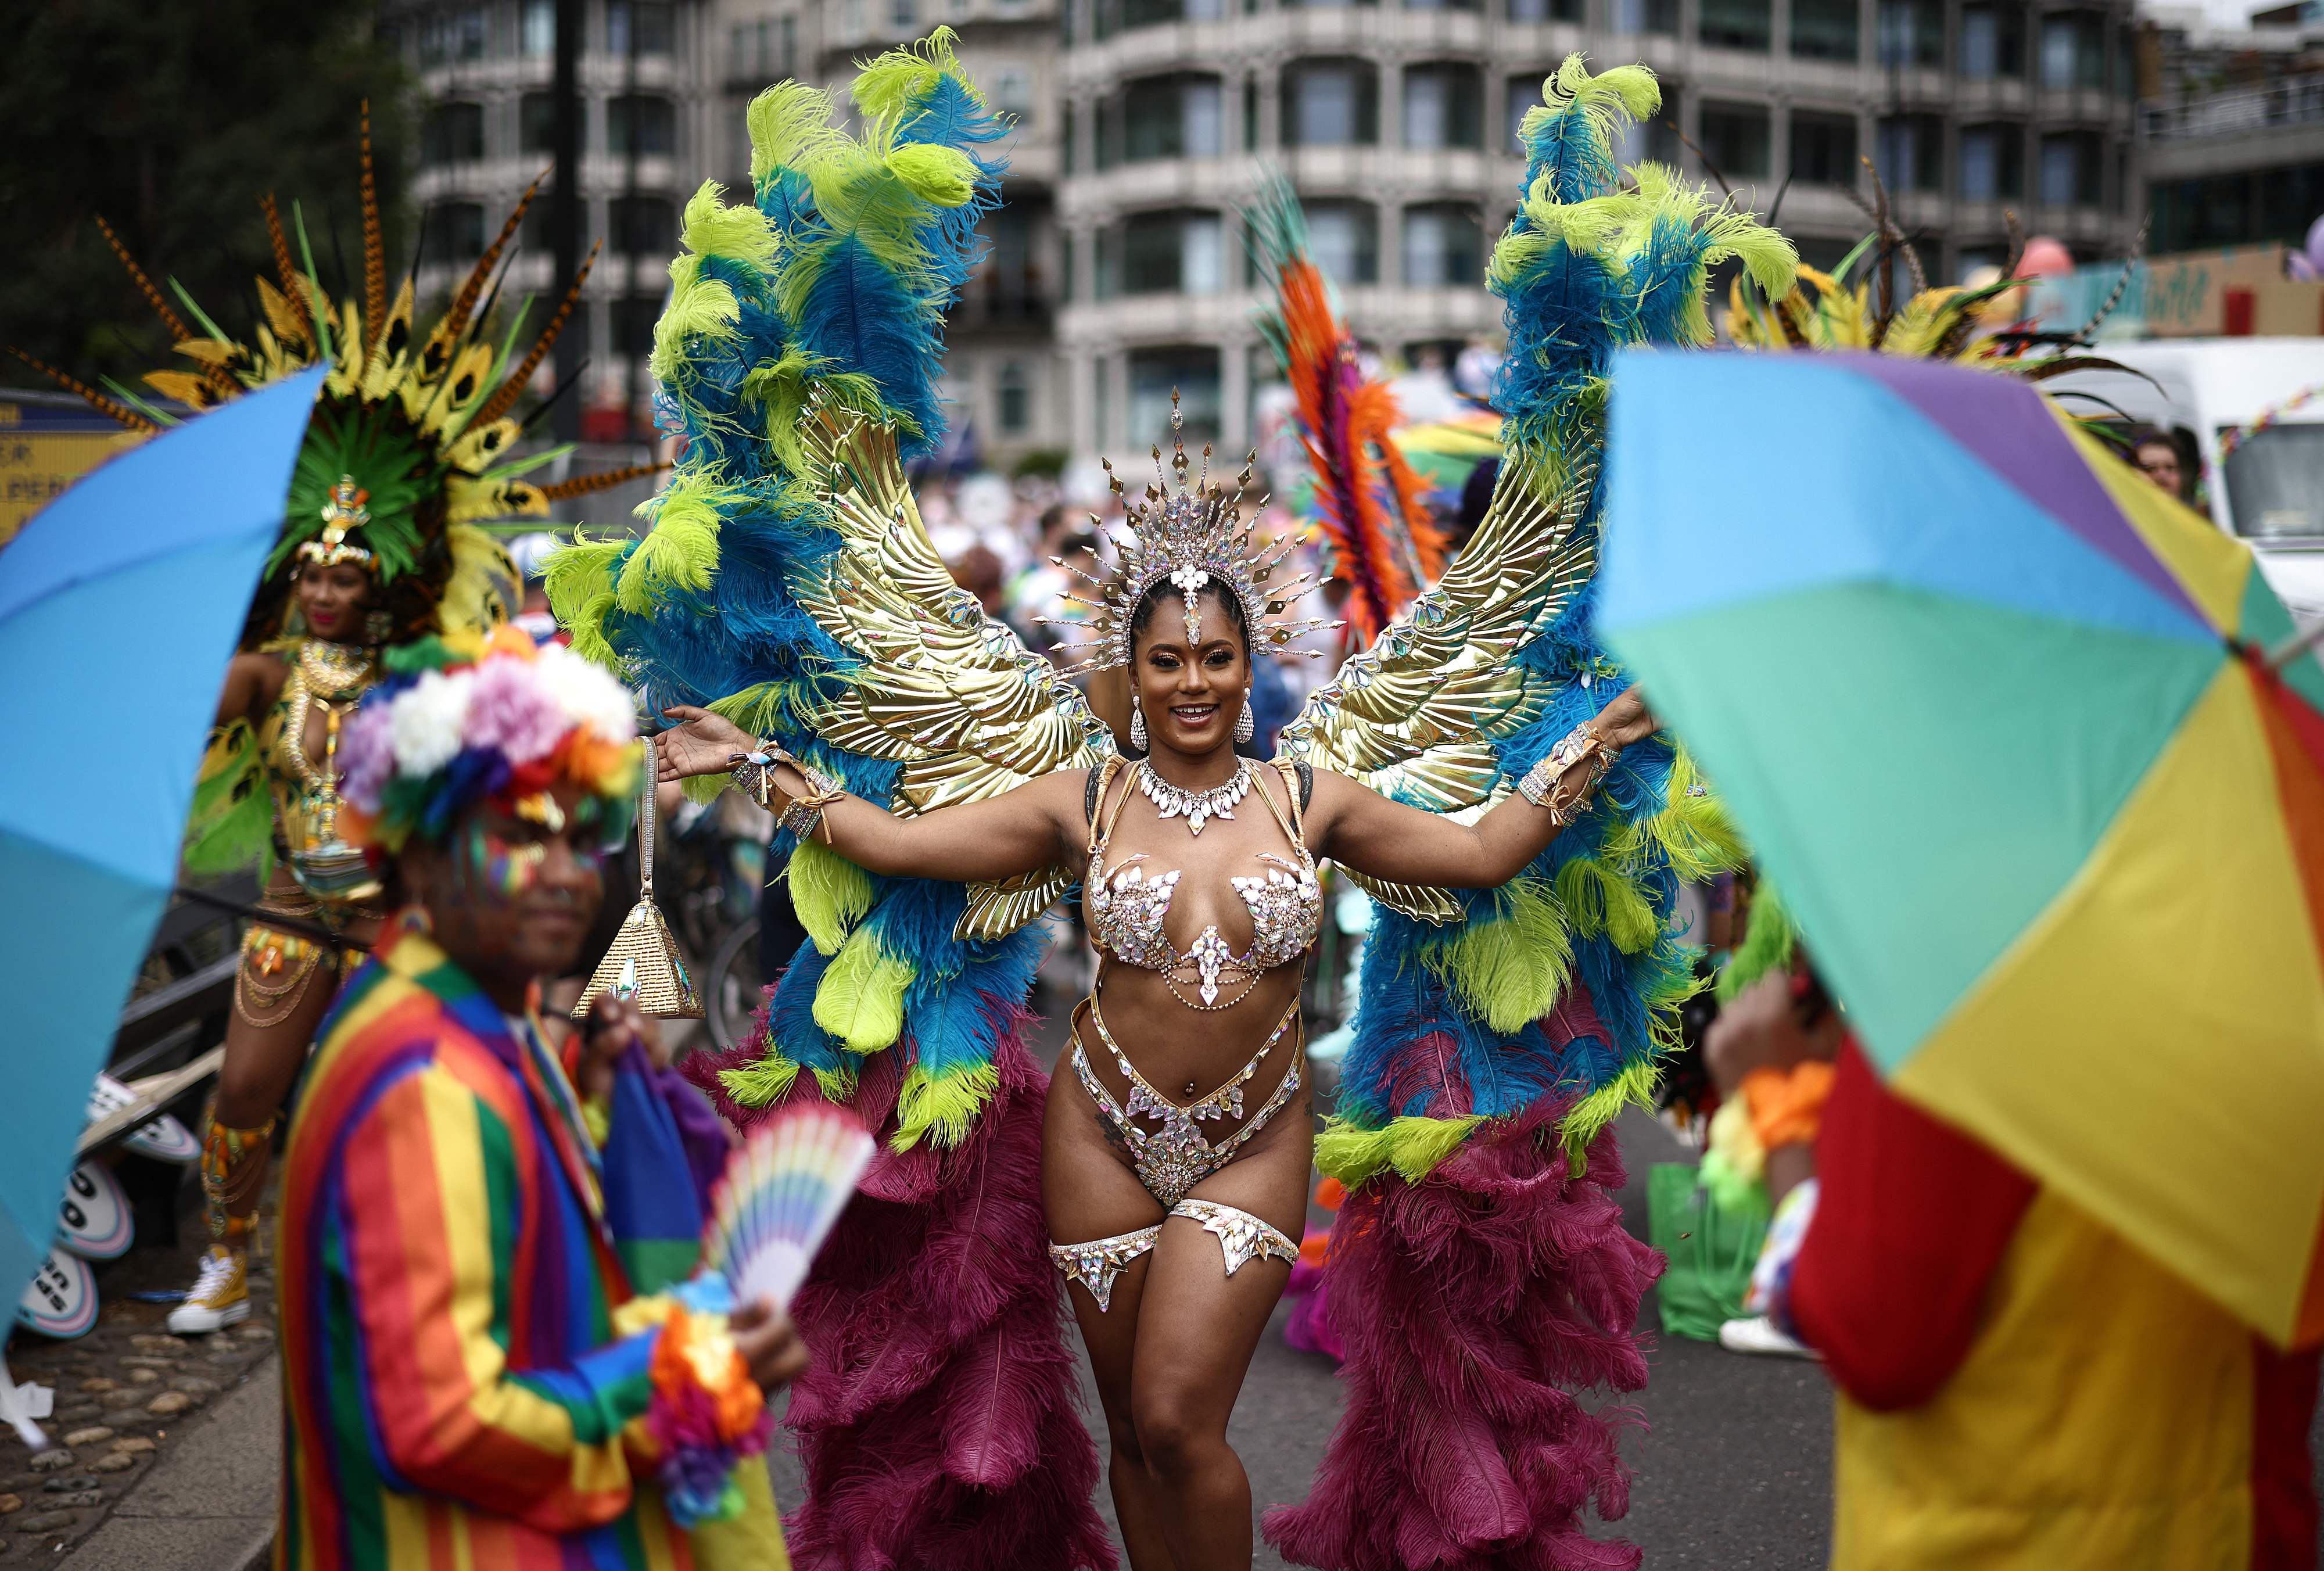 Members of the LGBT+ community take part in the annual Pride Parade in the streets of London